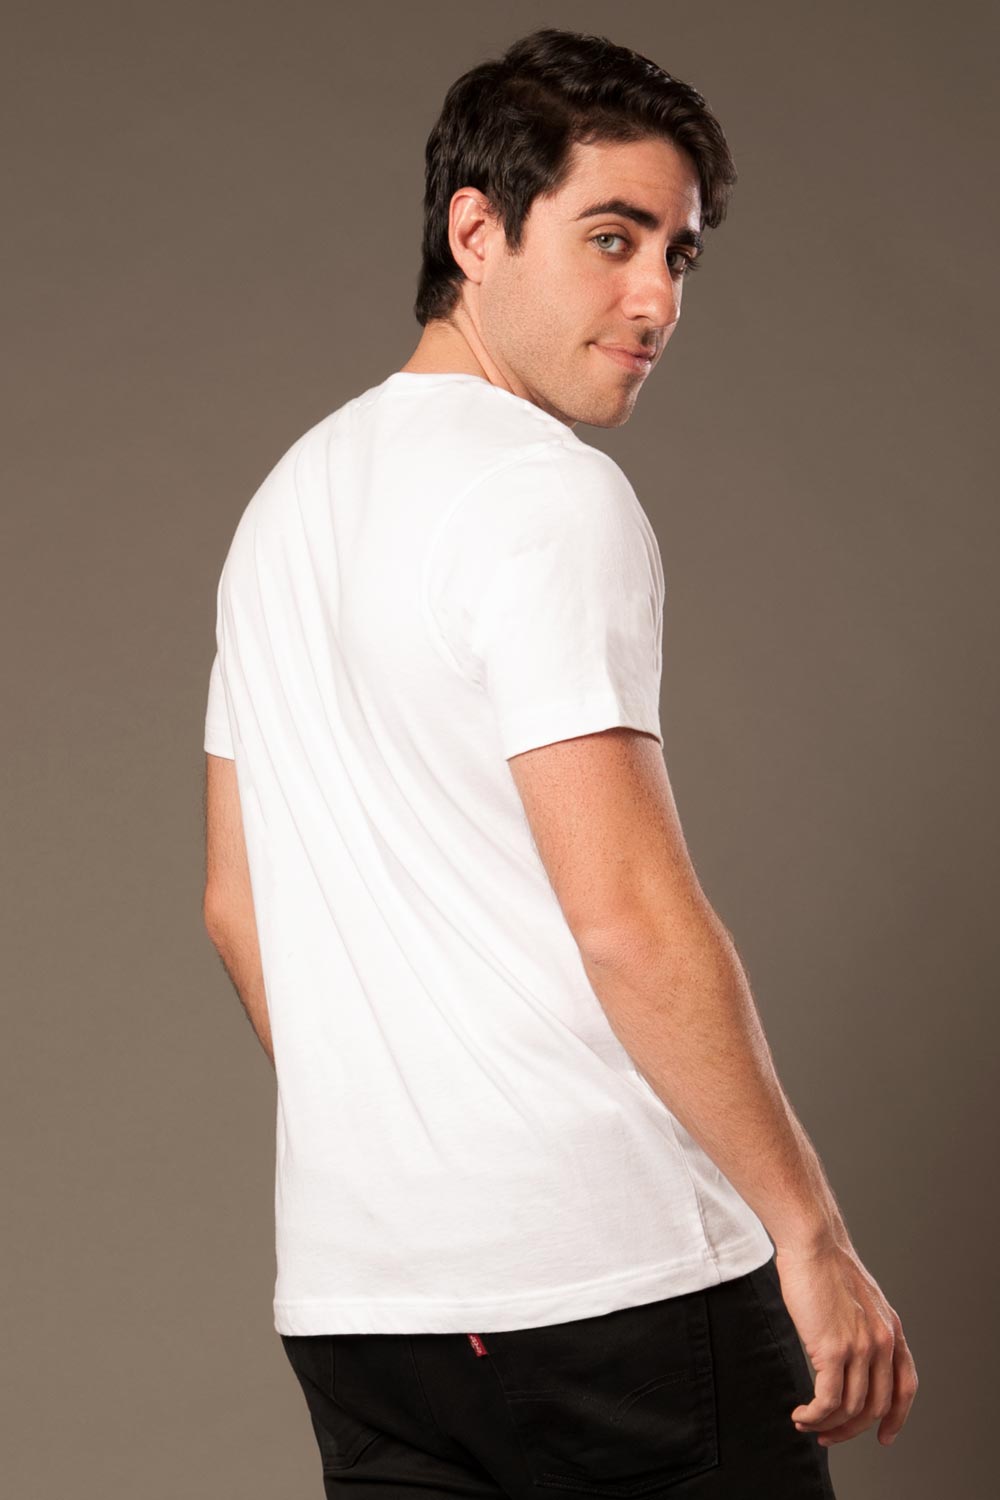 Final Sale - Men's Signature T-shirt in White by Traci Lords